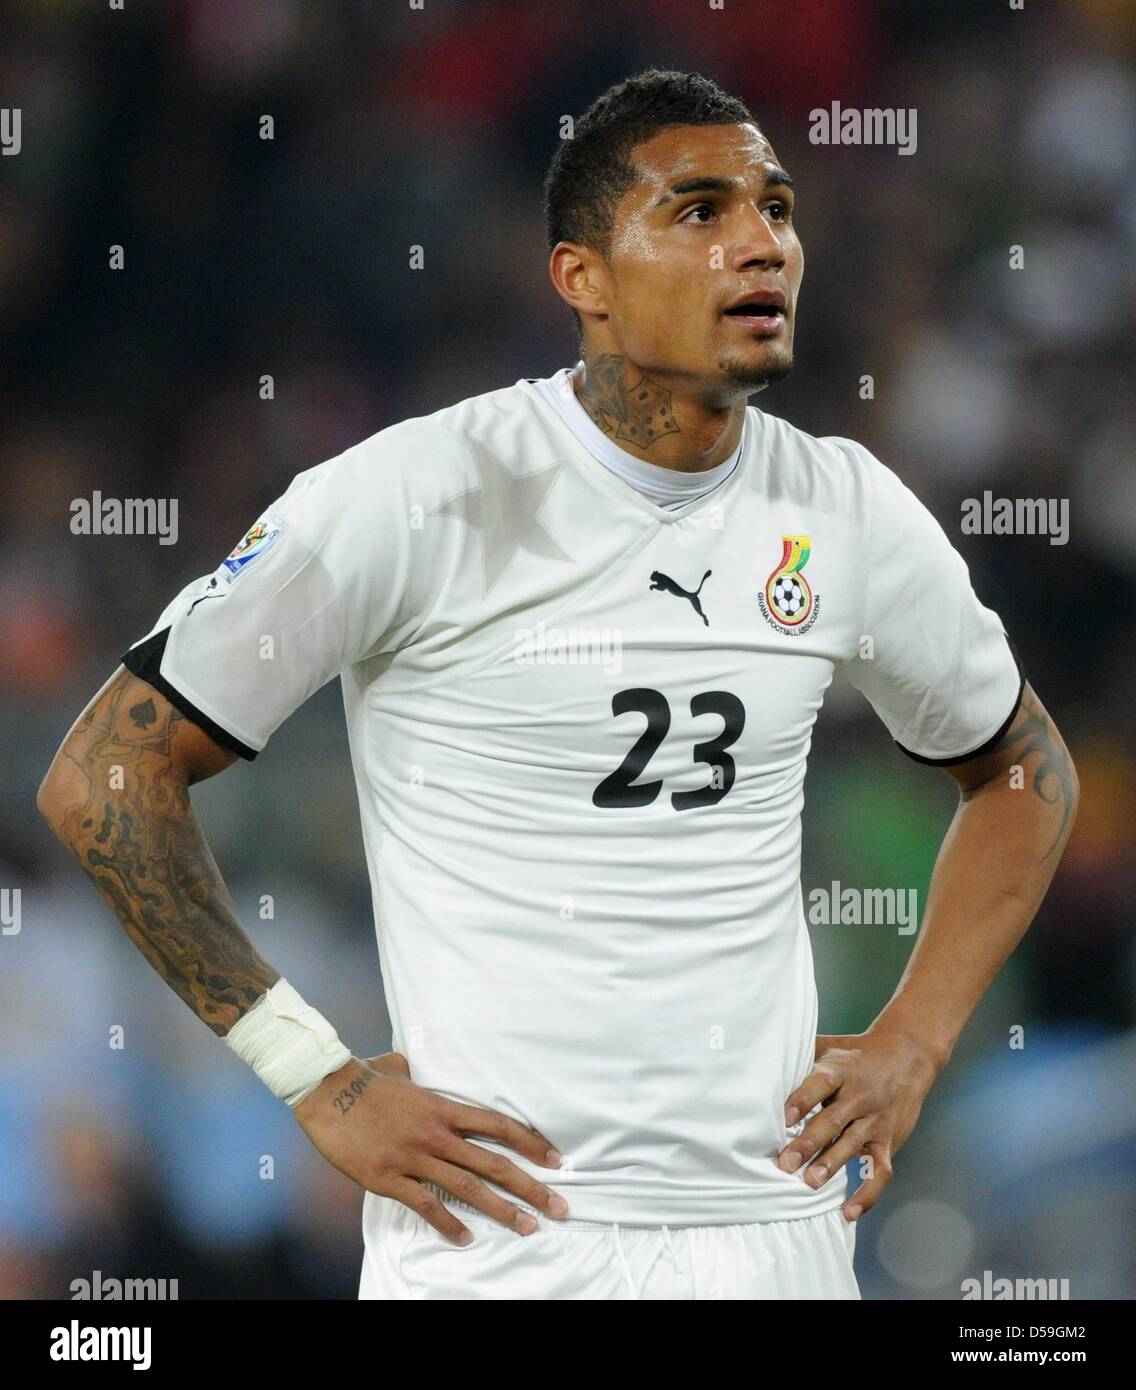 Ghana's Kevin-Prince Boateng reacts during the 2010 FIFA World Cup group D match between Ghana and Germany at Soccer City, Johannesburg, South Africa 23 June 2010. Photo: Marcus Brandt dpa - Please refer to http://dpaq.de/FIFA-WM2010-TC Stock Photo